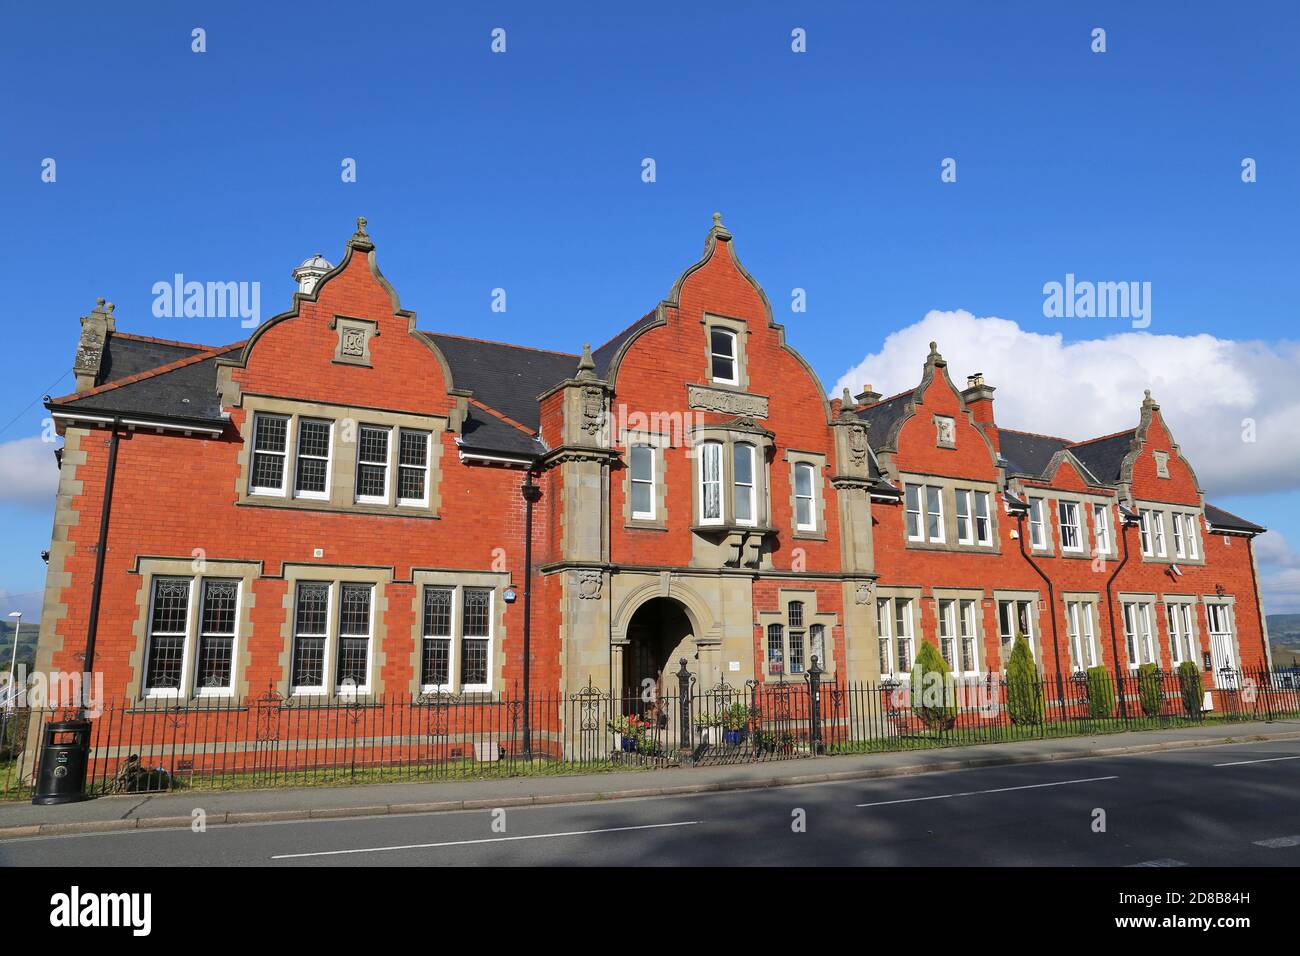 County Buildings (now private residences), High Street, Llandrindod Wells, Radnorshire, Powys, Wales, Great Britain, United Kingdom, UK, Europe Stock Photo